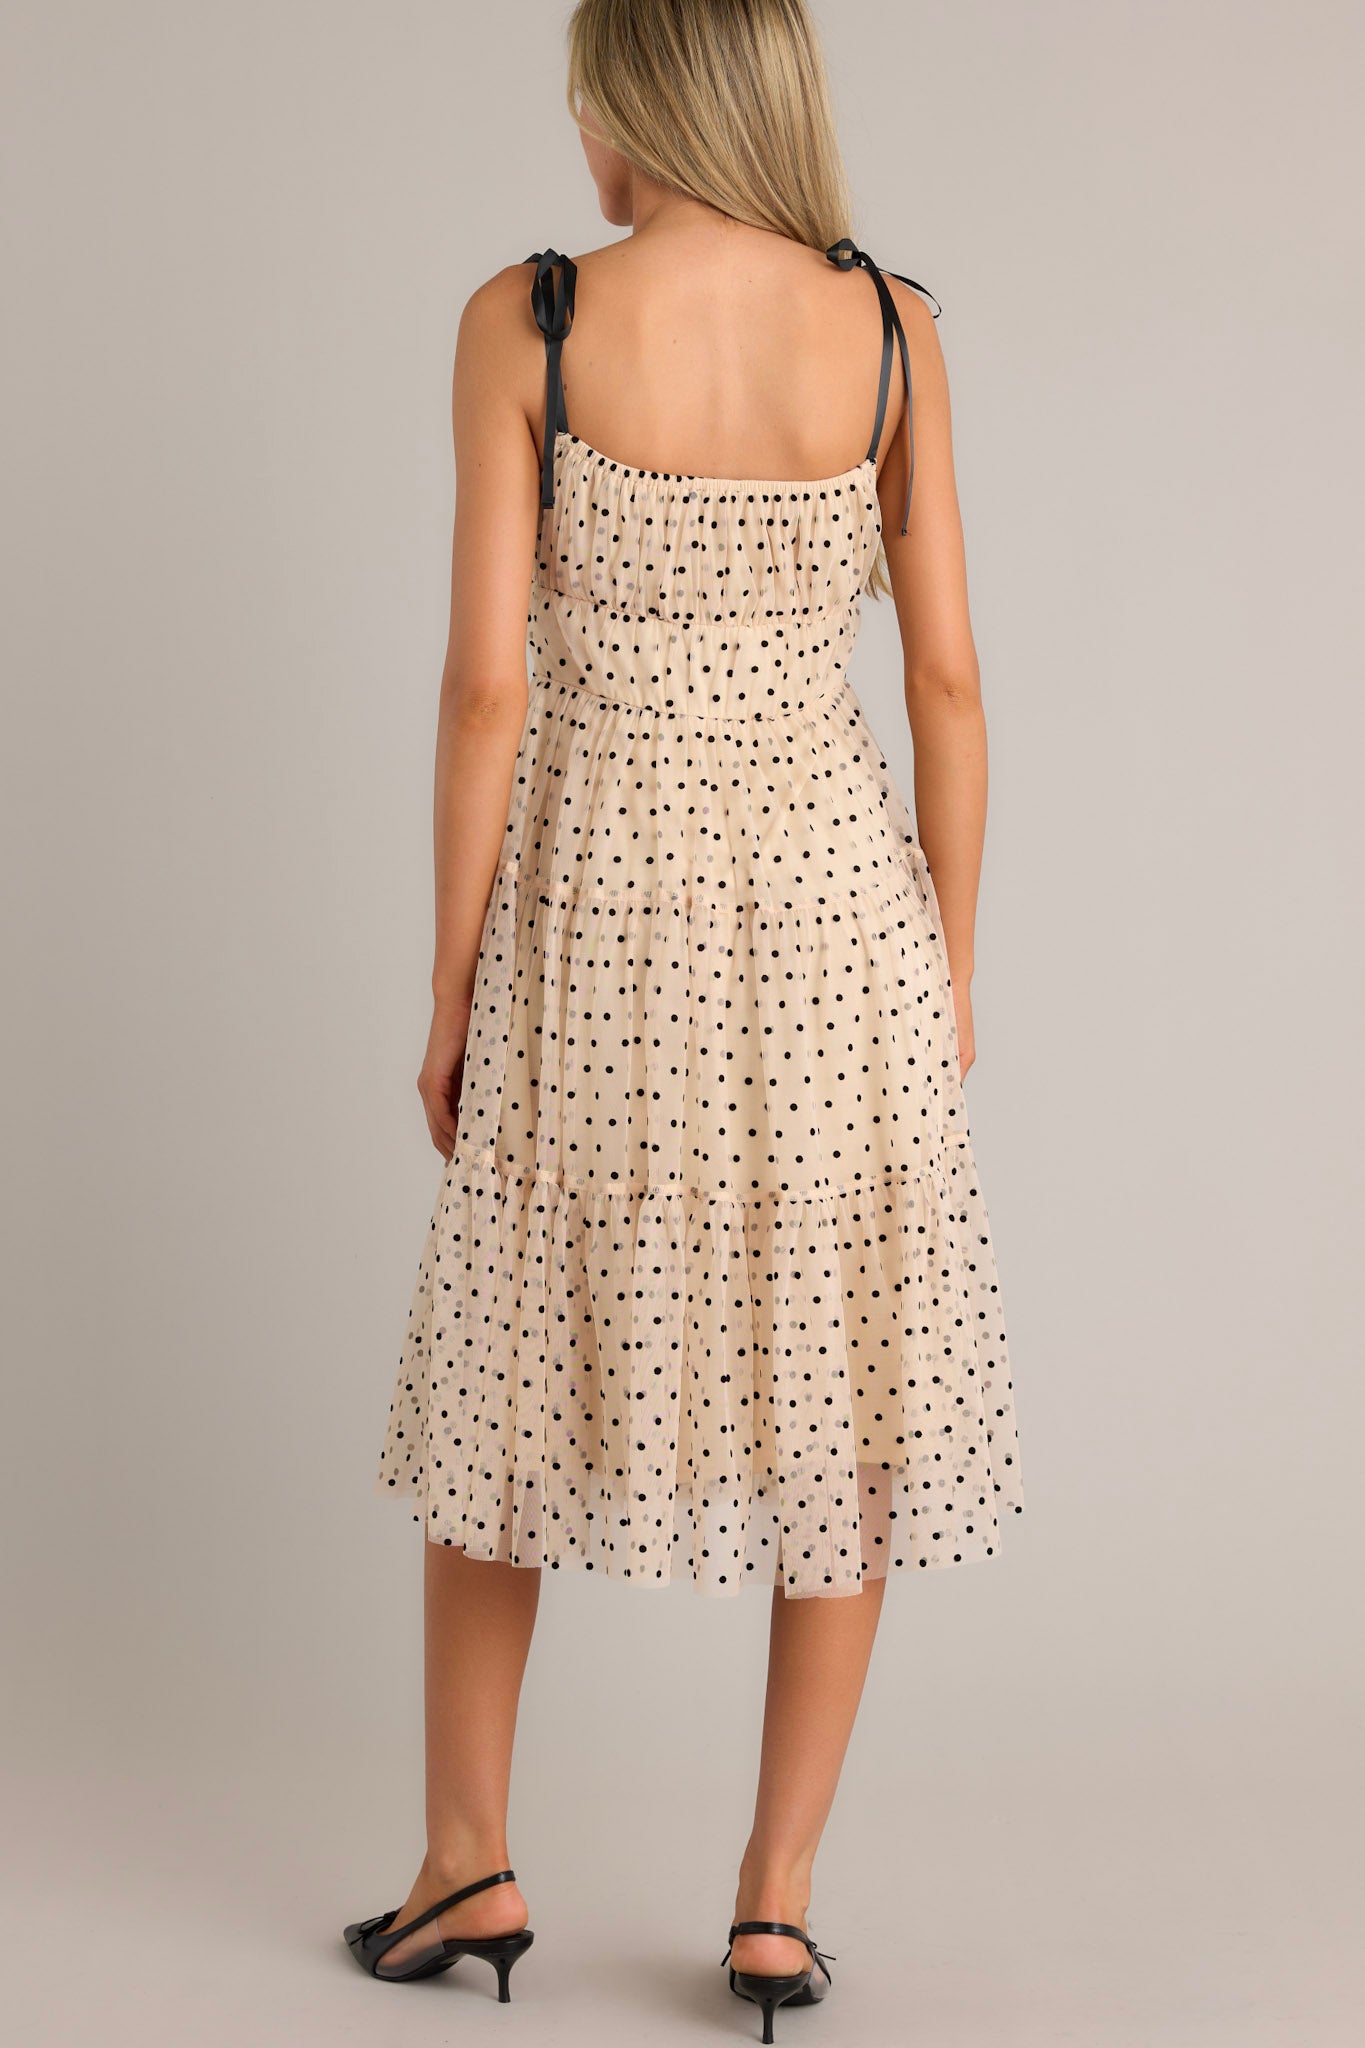 Back view of a beige midi dress highlighting the thin self-tie straps, tiers, black polka dots, and tulle.